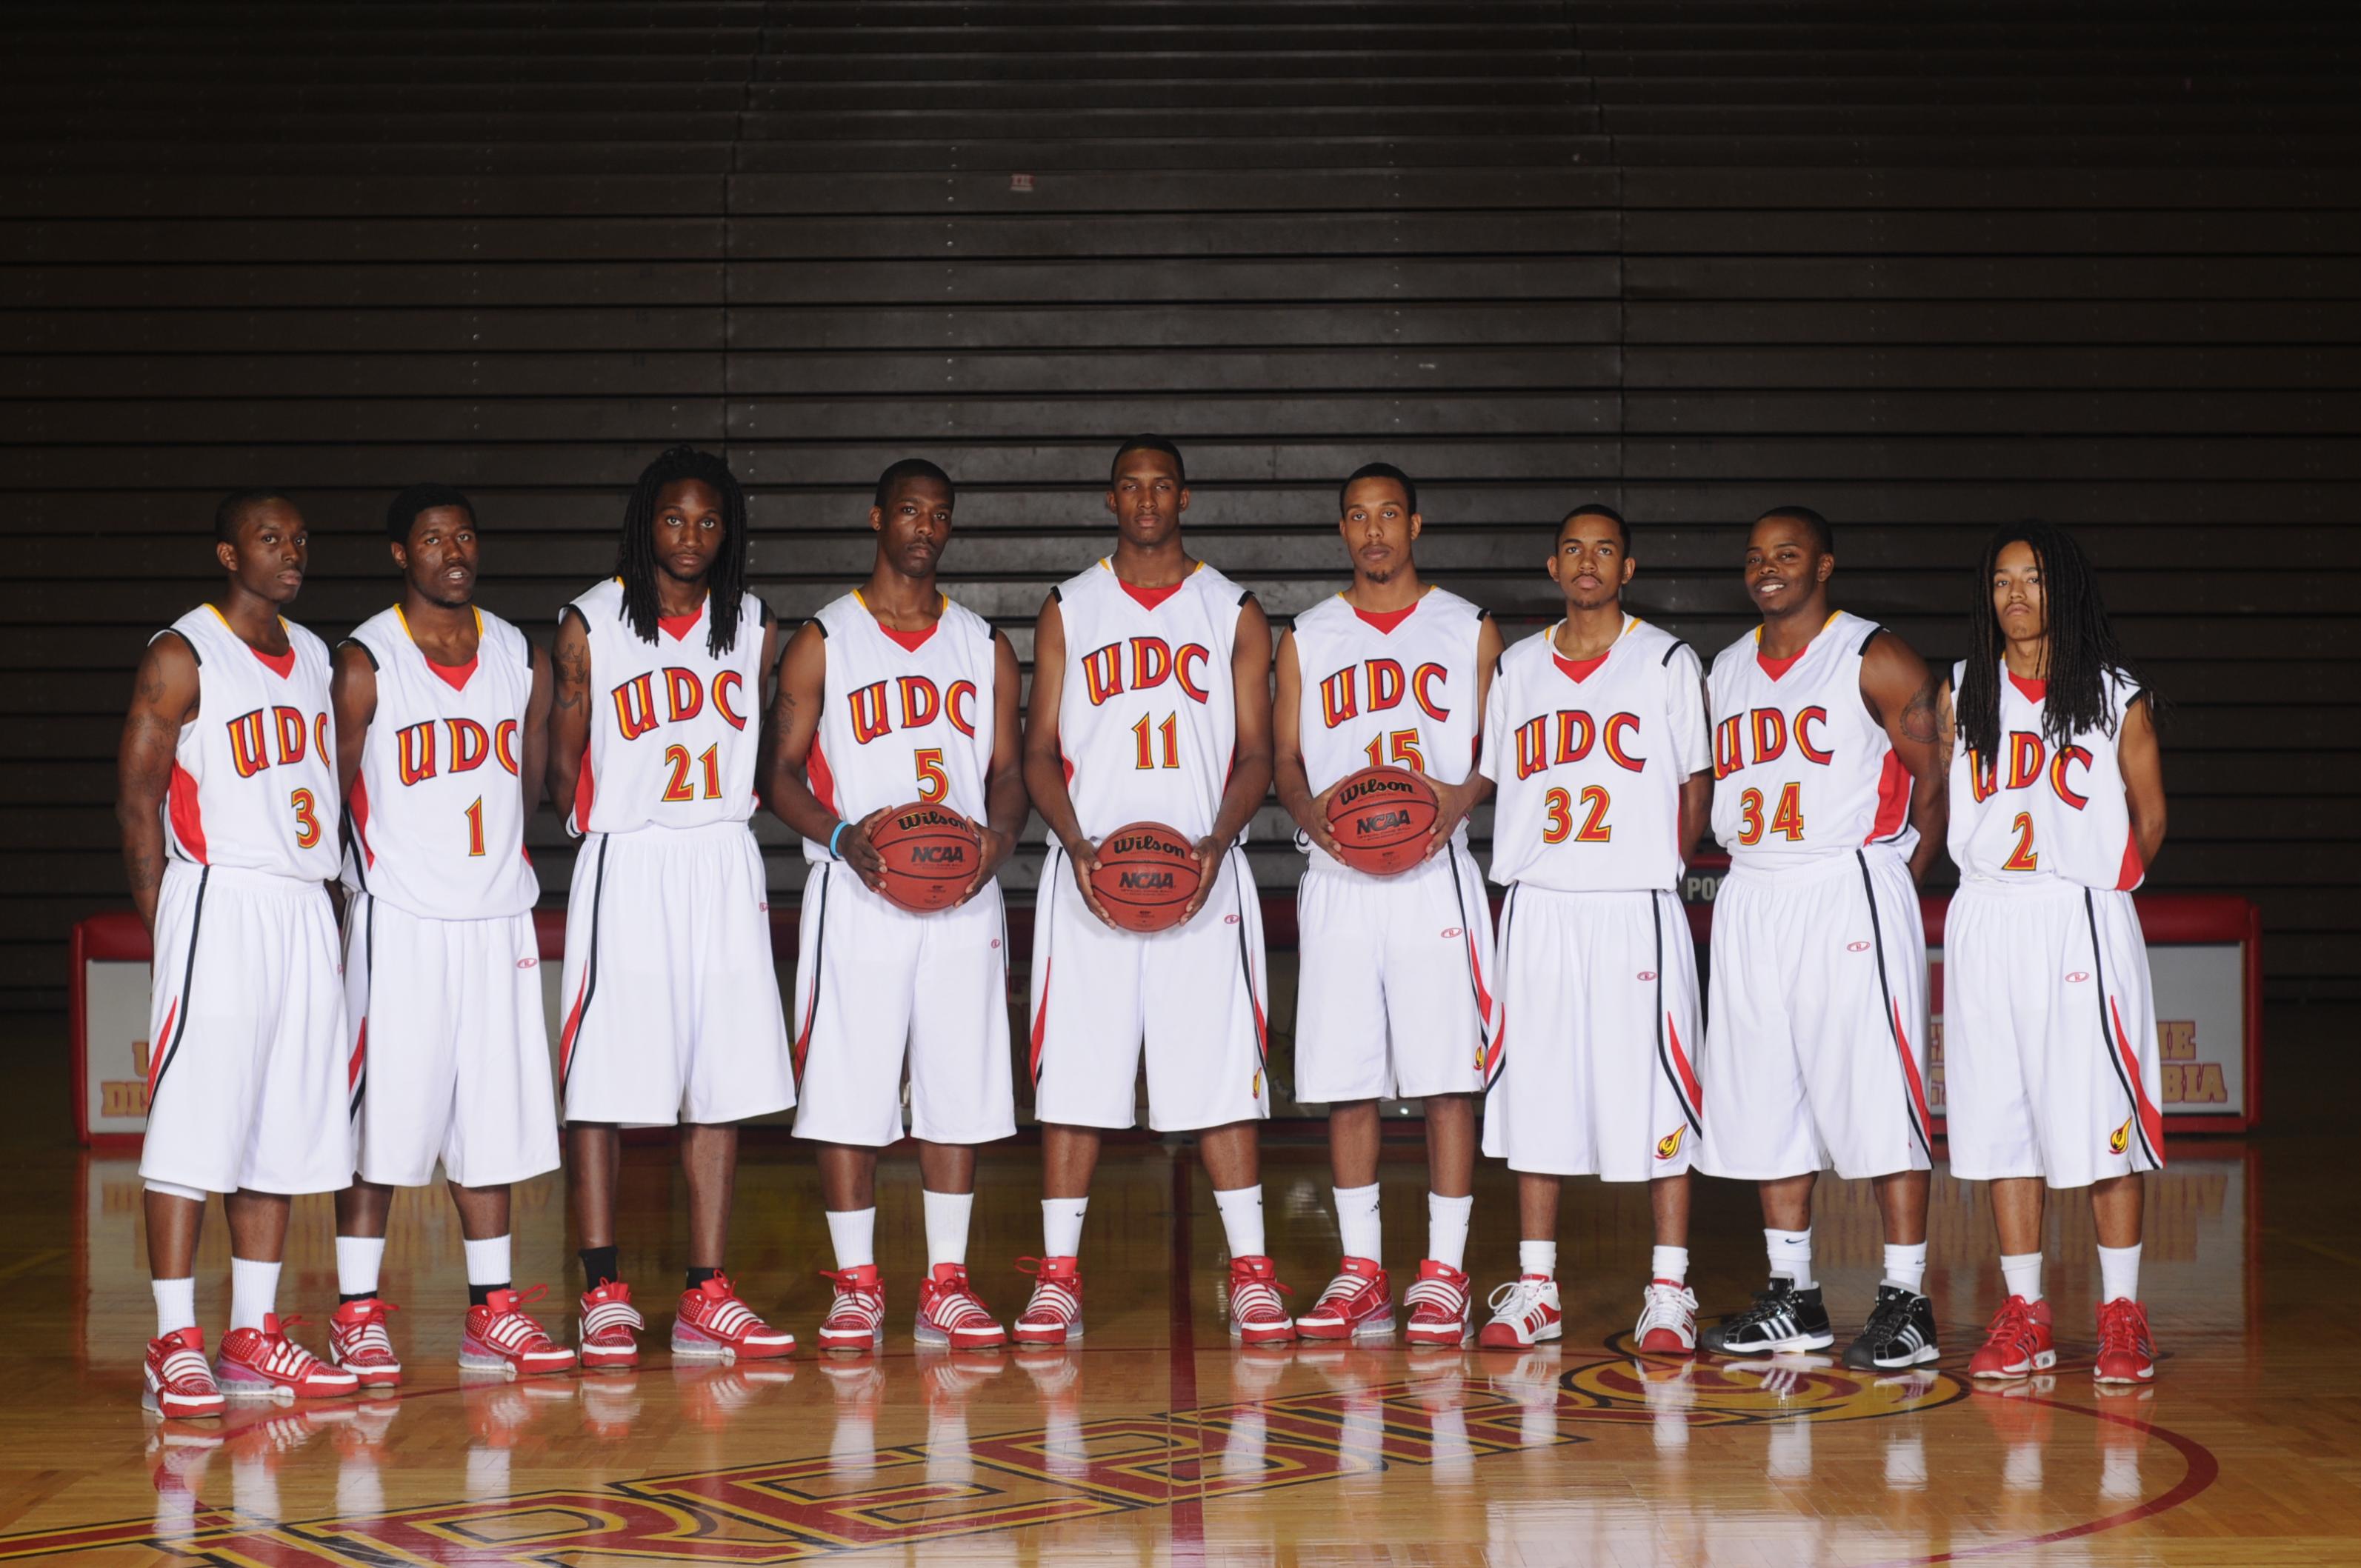 UDC to Play Bowie State Tonight